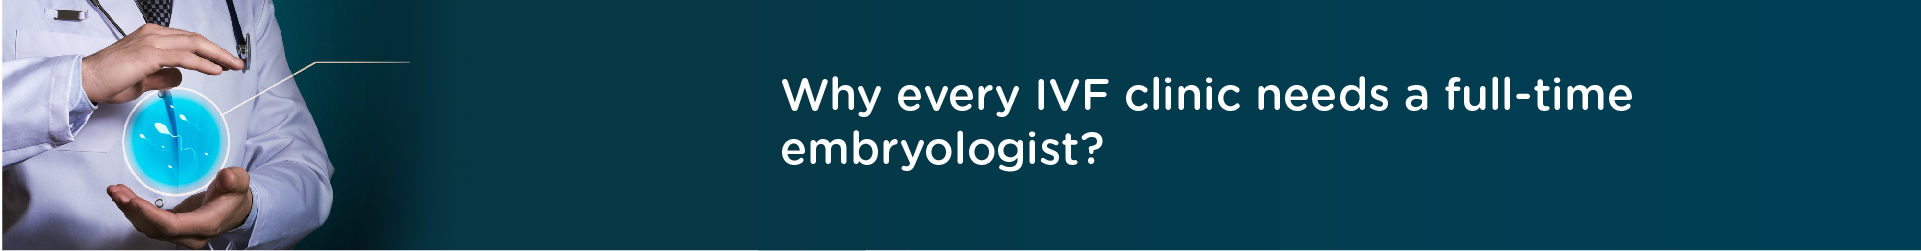 Why Every IVF Clinic Needs a Full-Time Embryologist